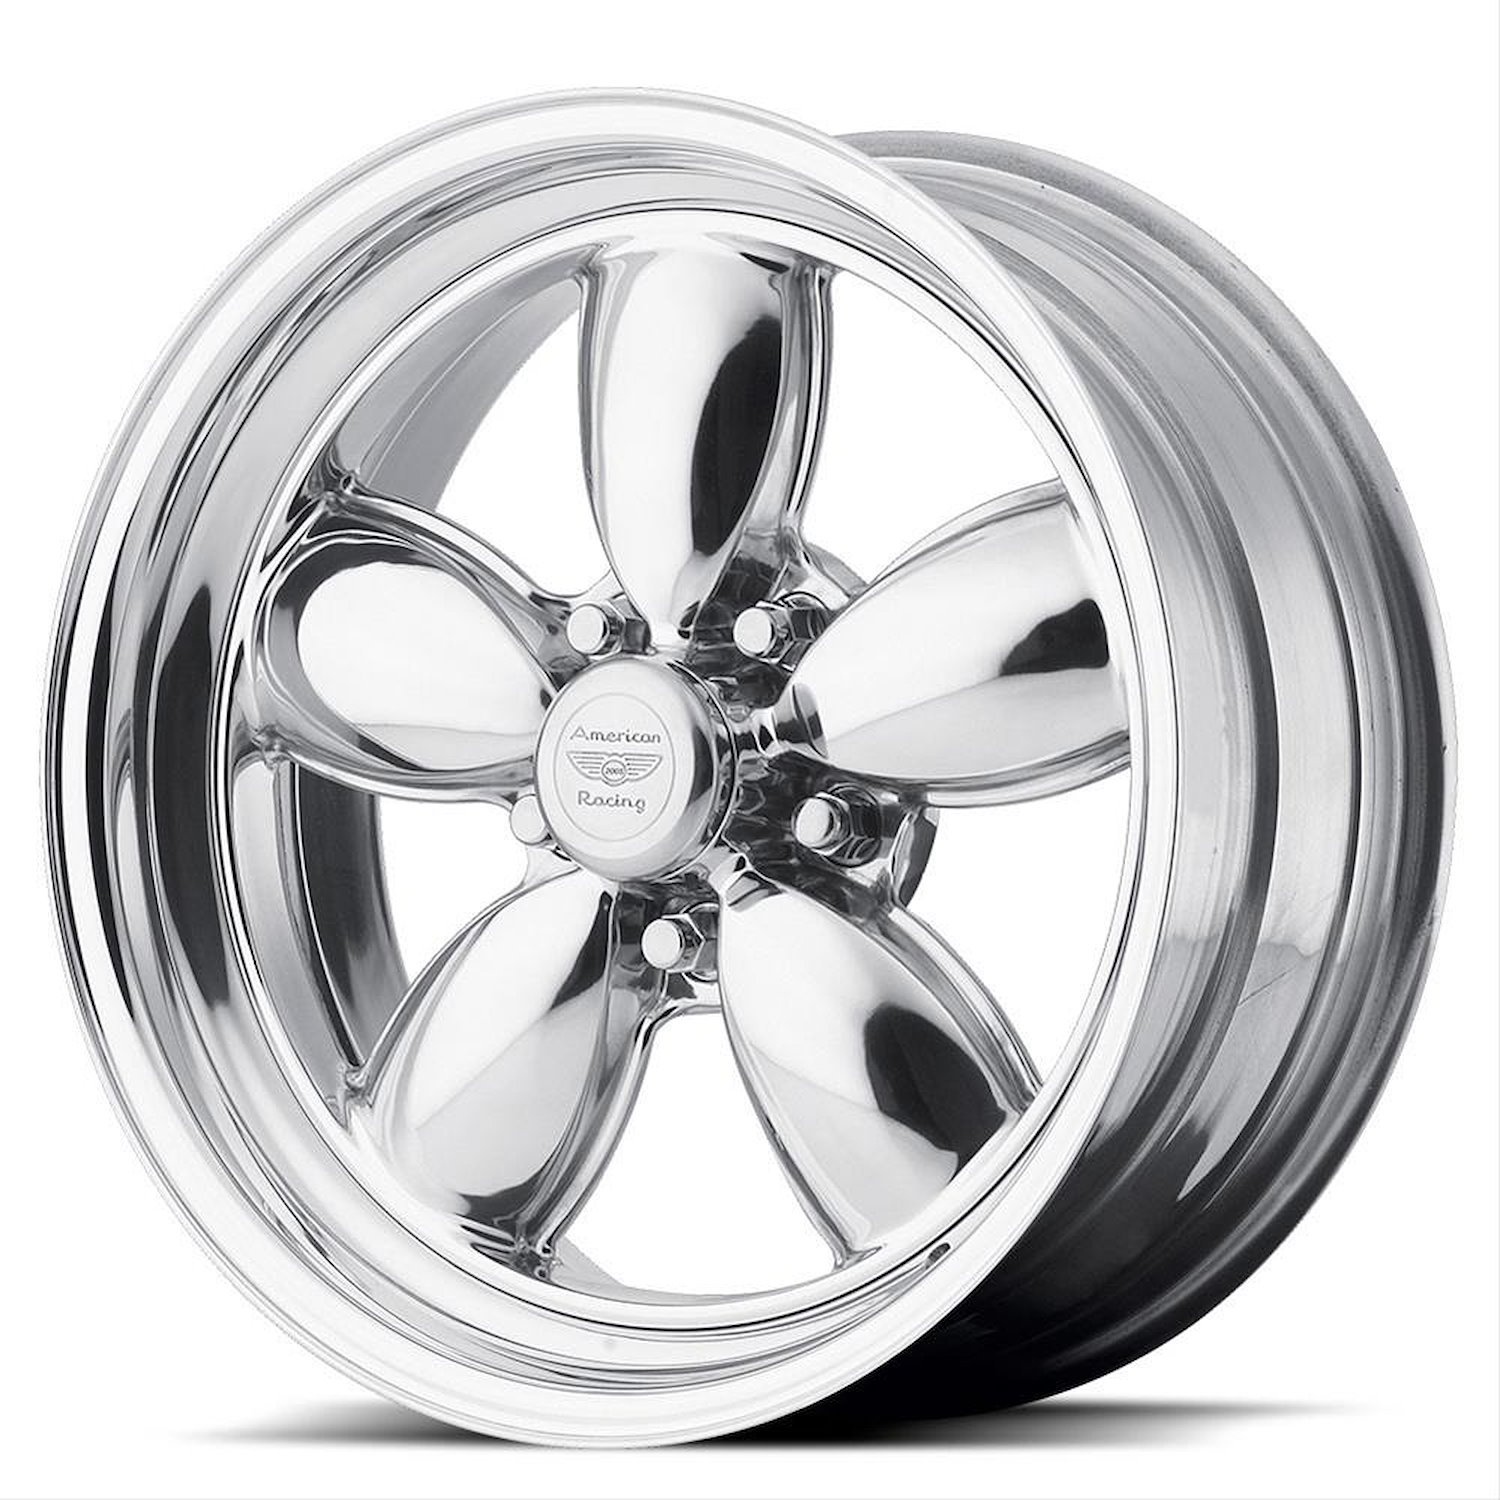 AMERICAN RACING CLASSIC 200S TWO-PIECE POLISHED 15 x 6 5X4.75 -13 2.99